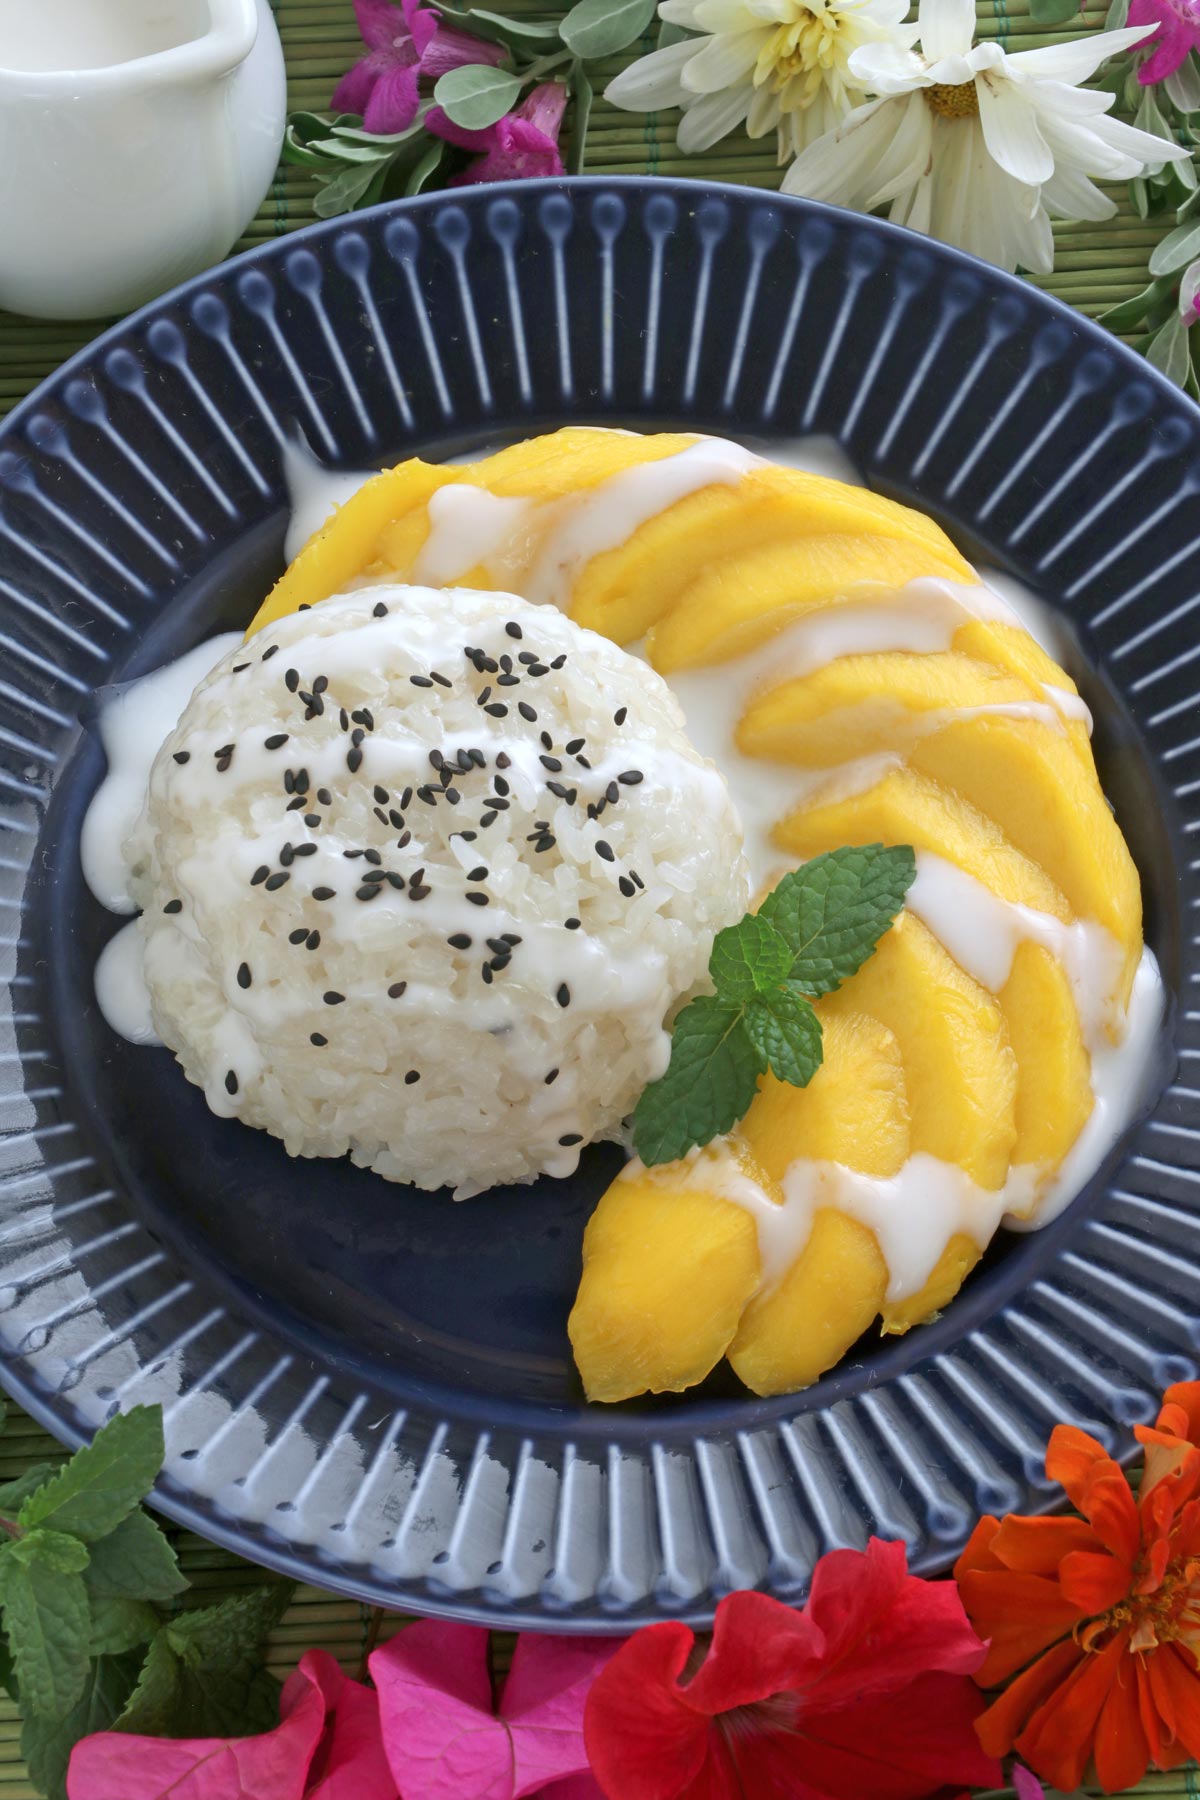 Slices of ripe mangoes served with creamy sticky rice.